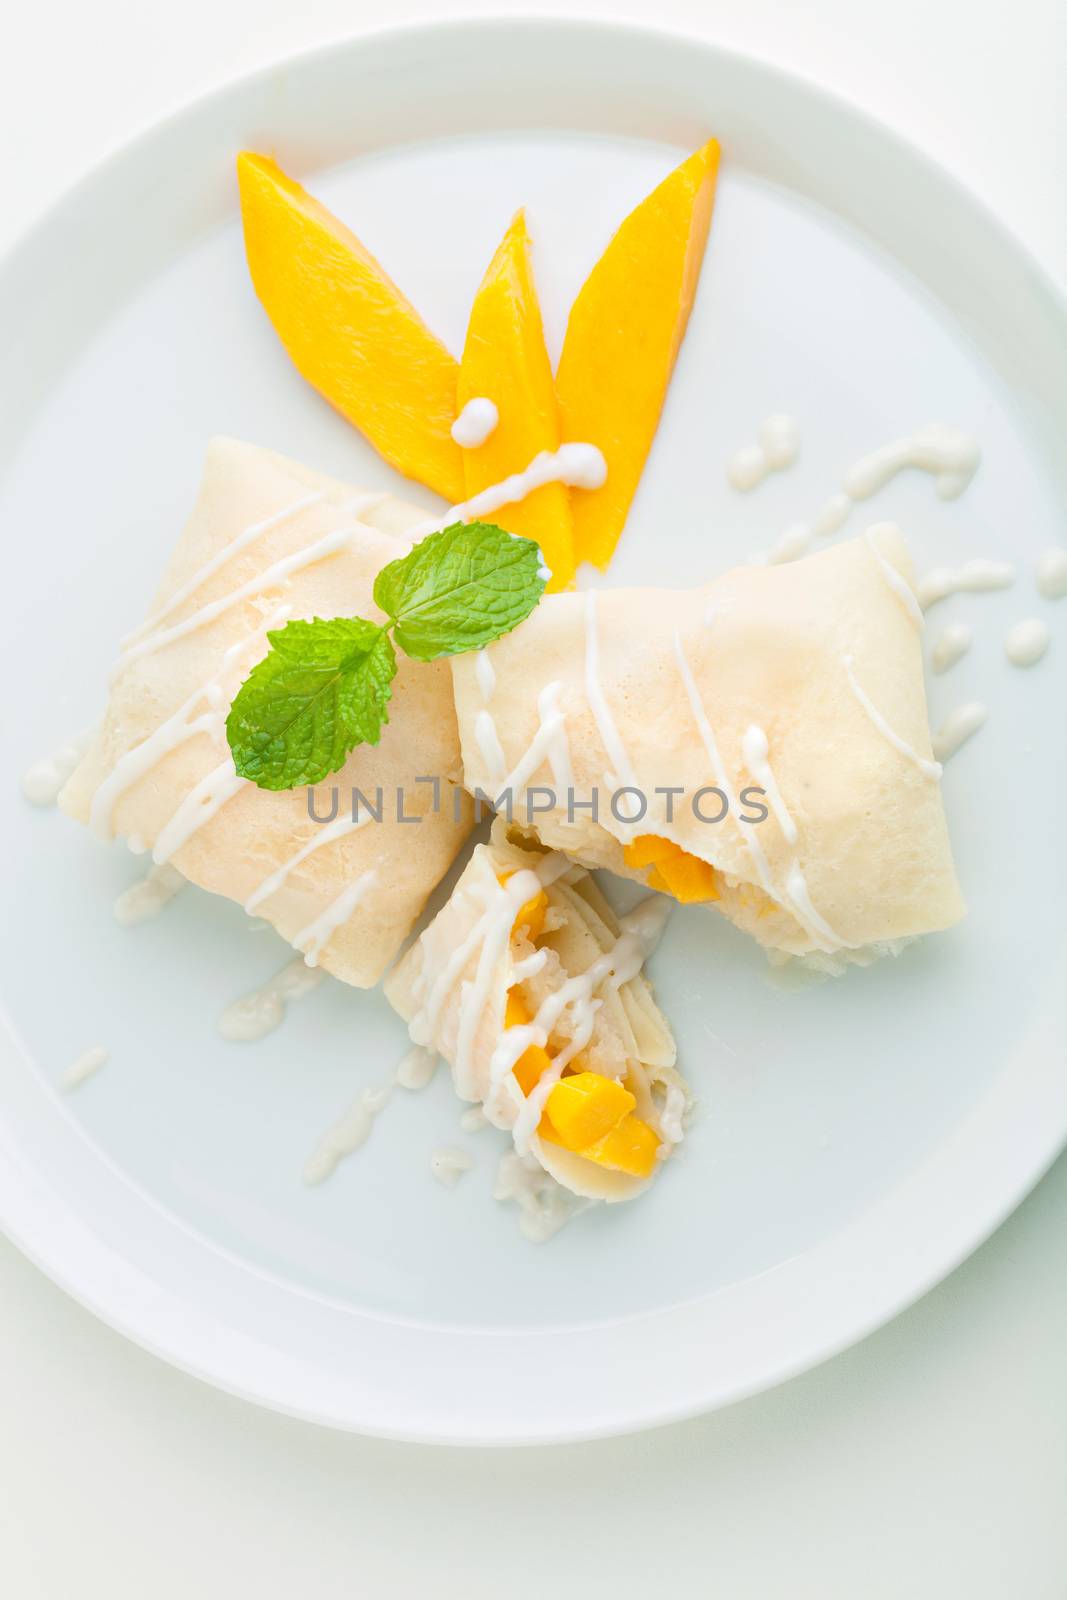 Thai Dessert Crepes by graficallyminded